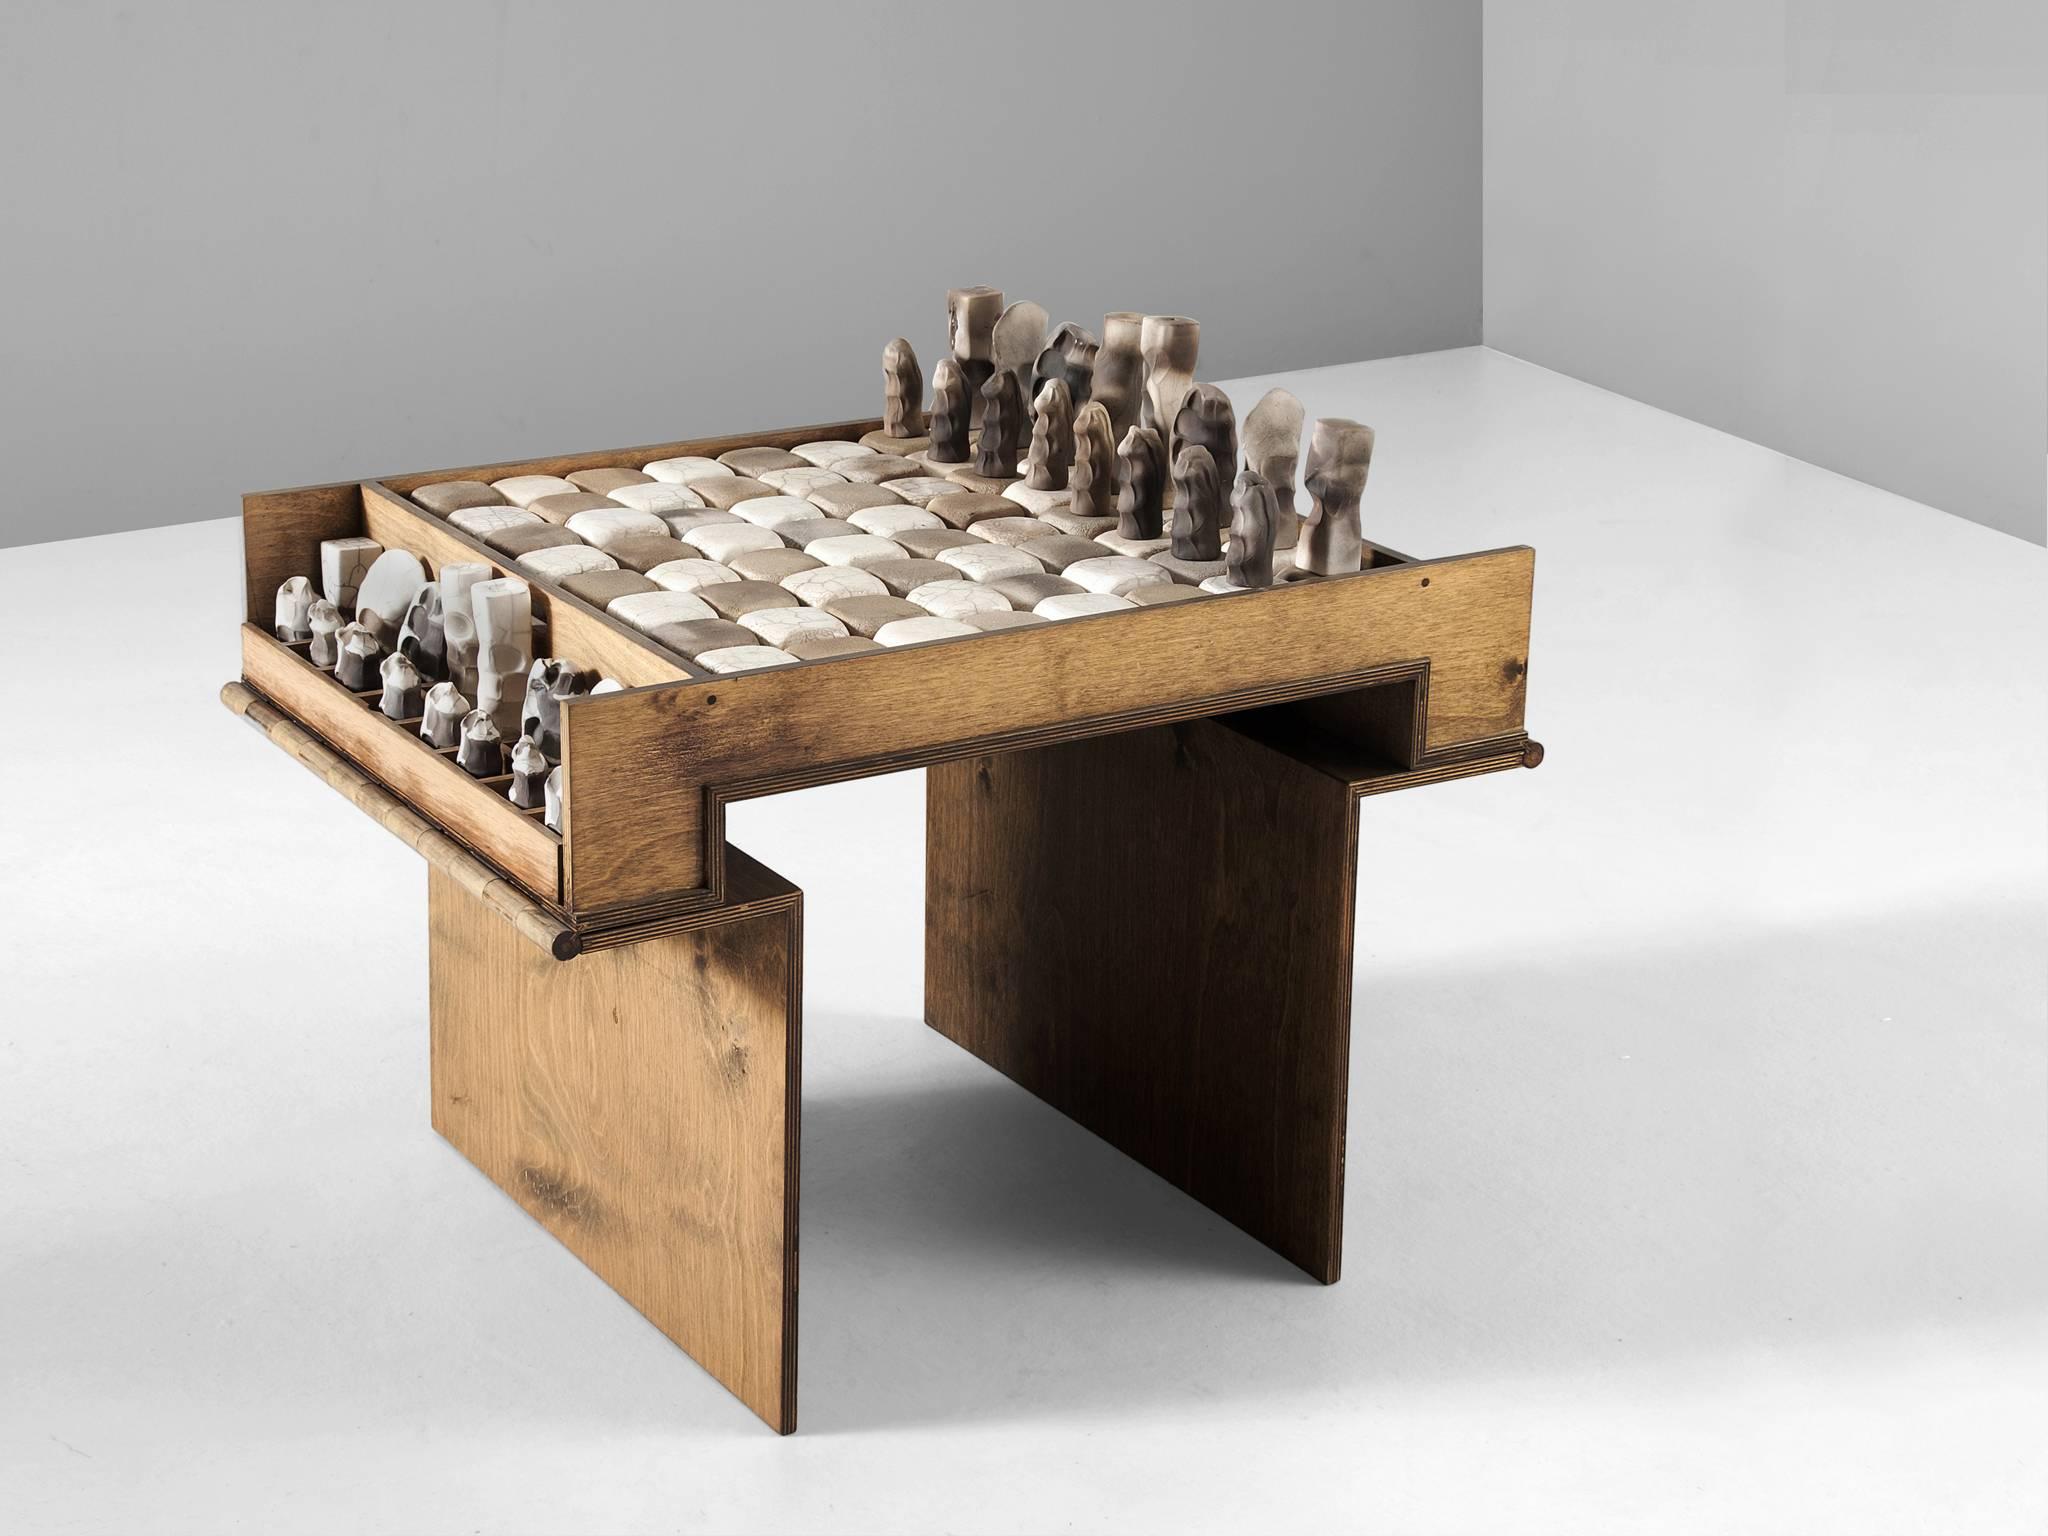 Chess game, in ceramic and wood, Italy last quarter 20th century. 

Exceptional game of chess. The birch plywood table holds the ceramic chess board and pieces. The wooden table can be fold into a chest. A checkered board of white and black